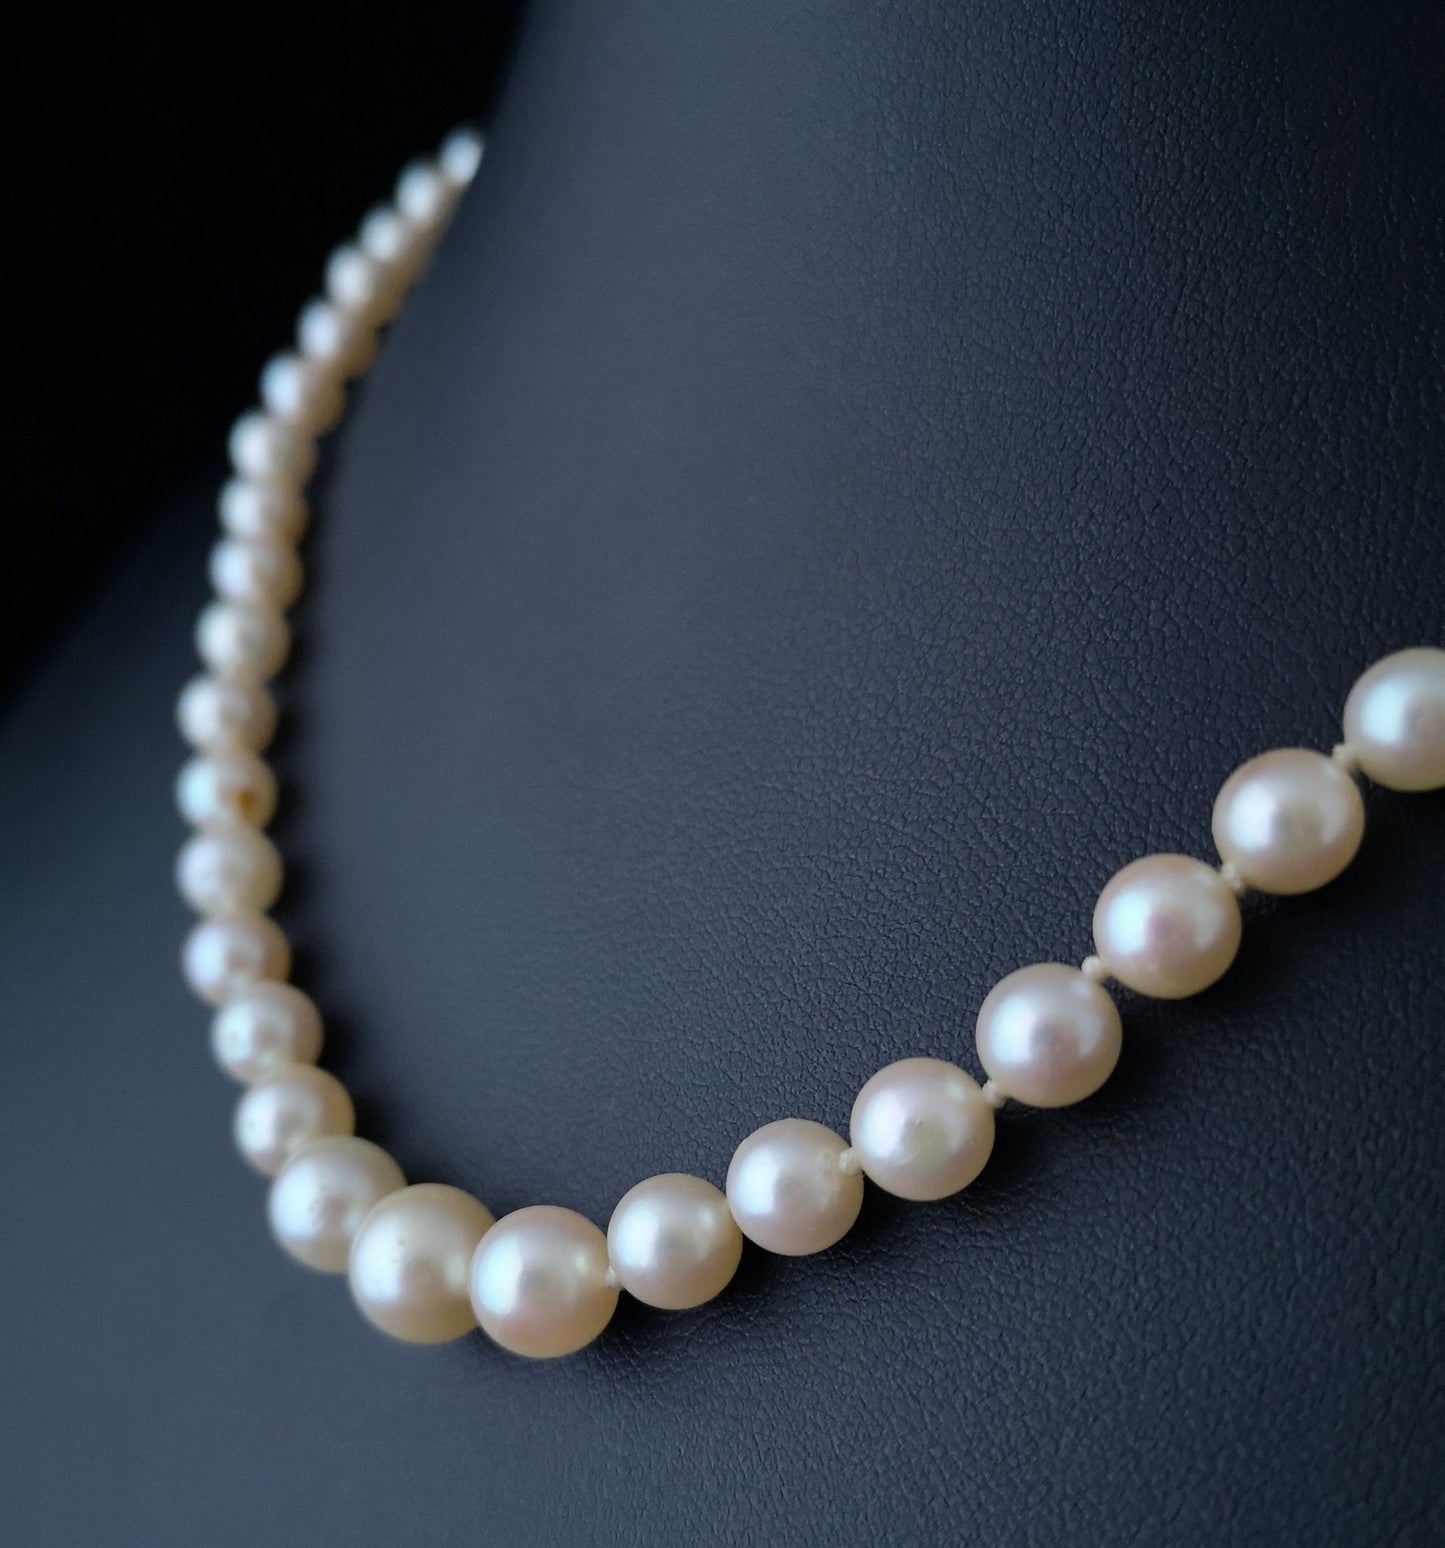 Art Deco pearl necklace, 14k white gold and diamond